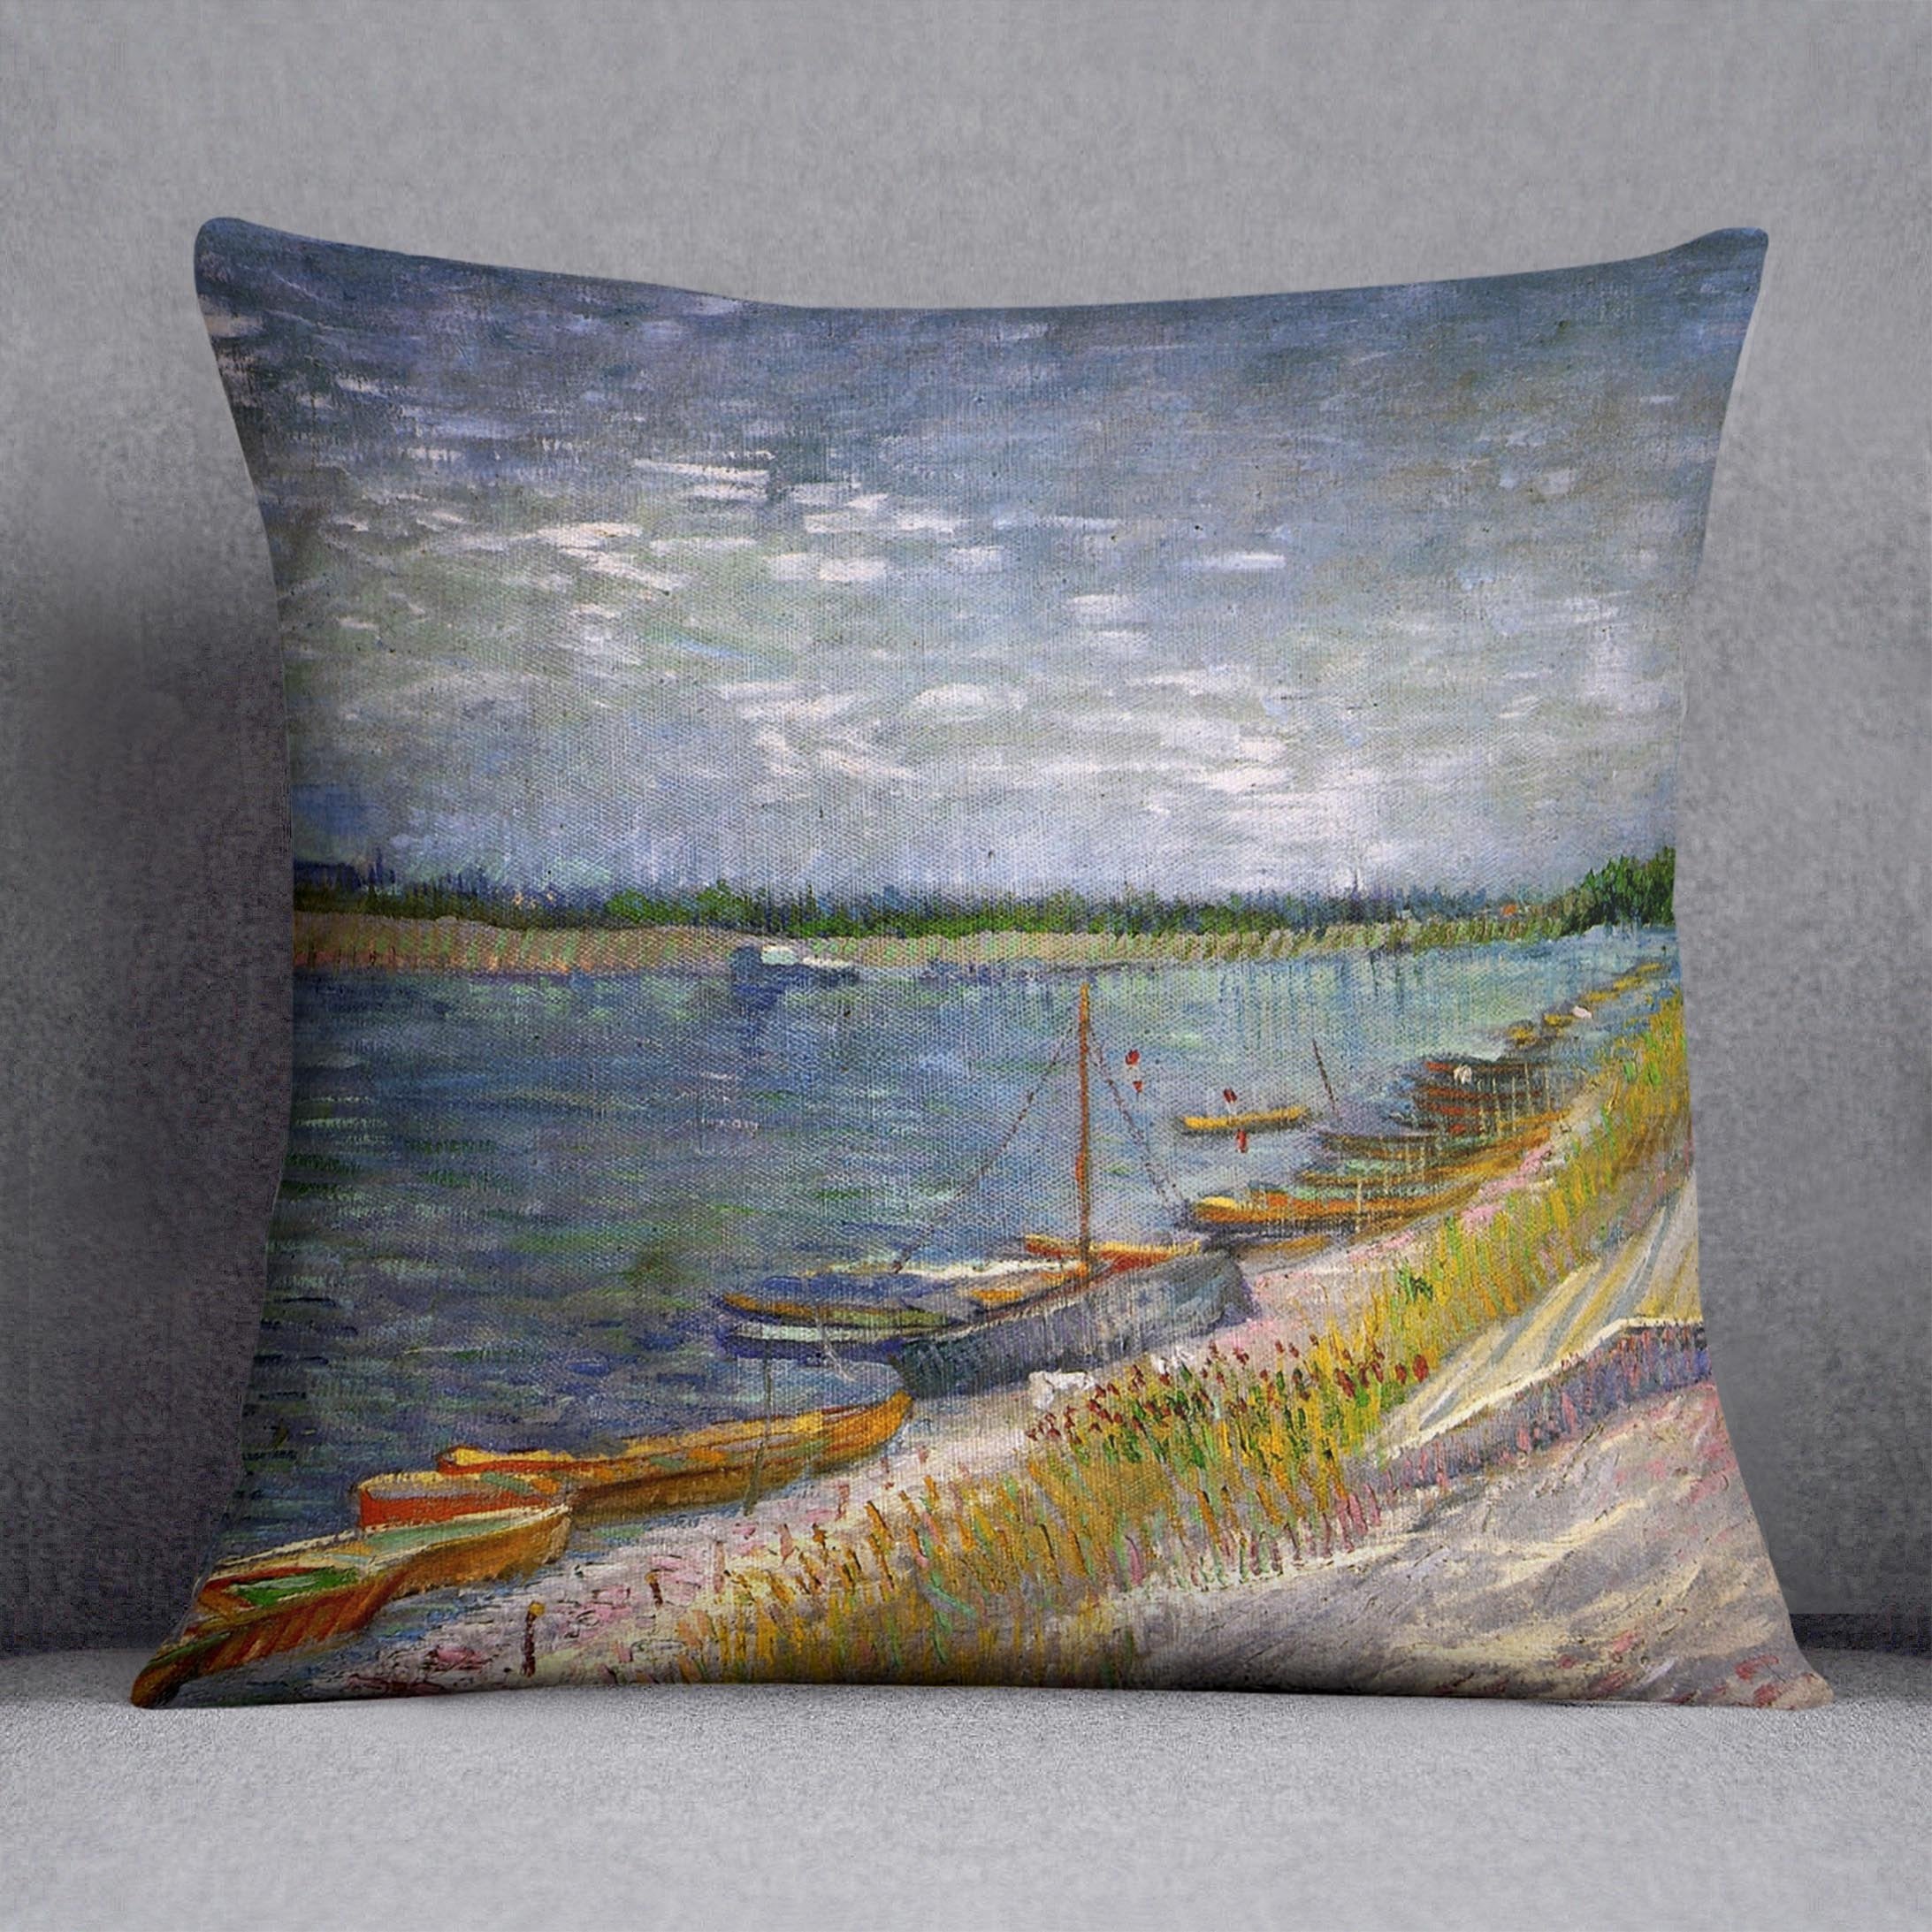 View of a River with Rowing Boats by Van Gogh Throw Pillow